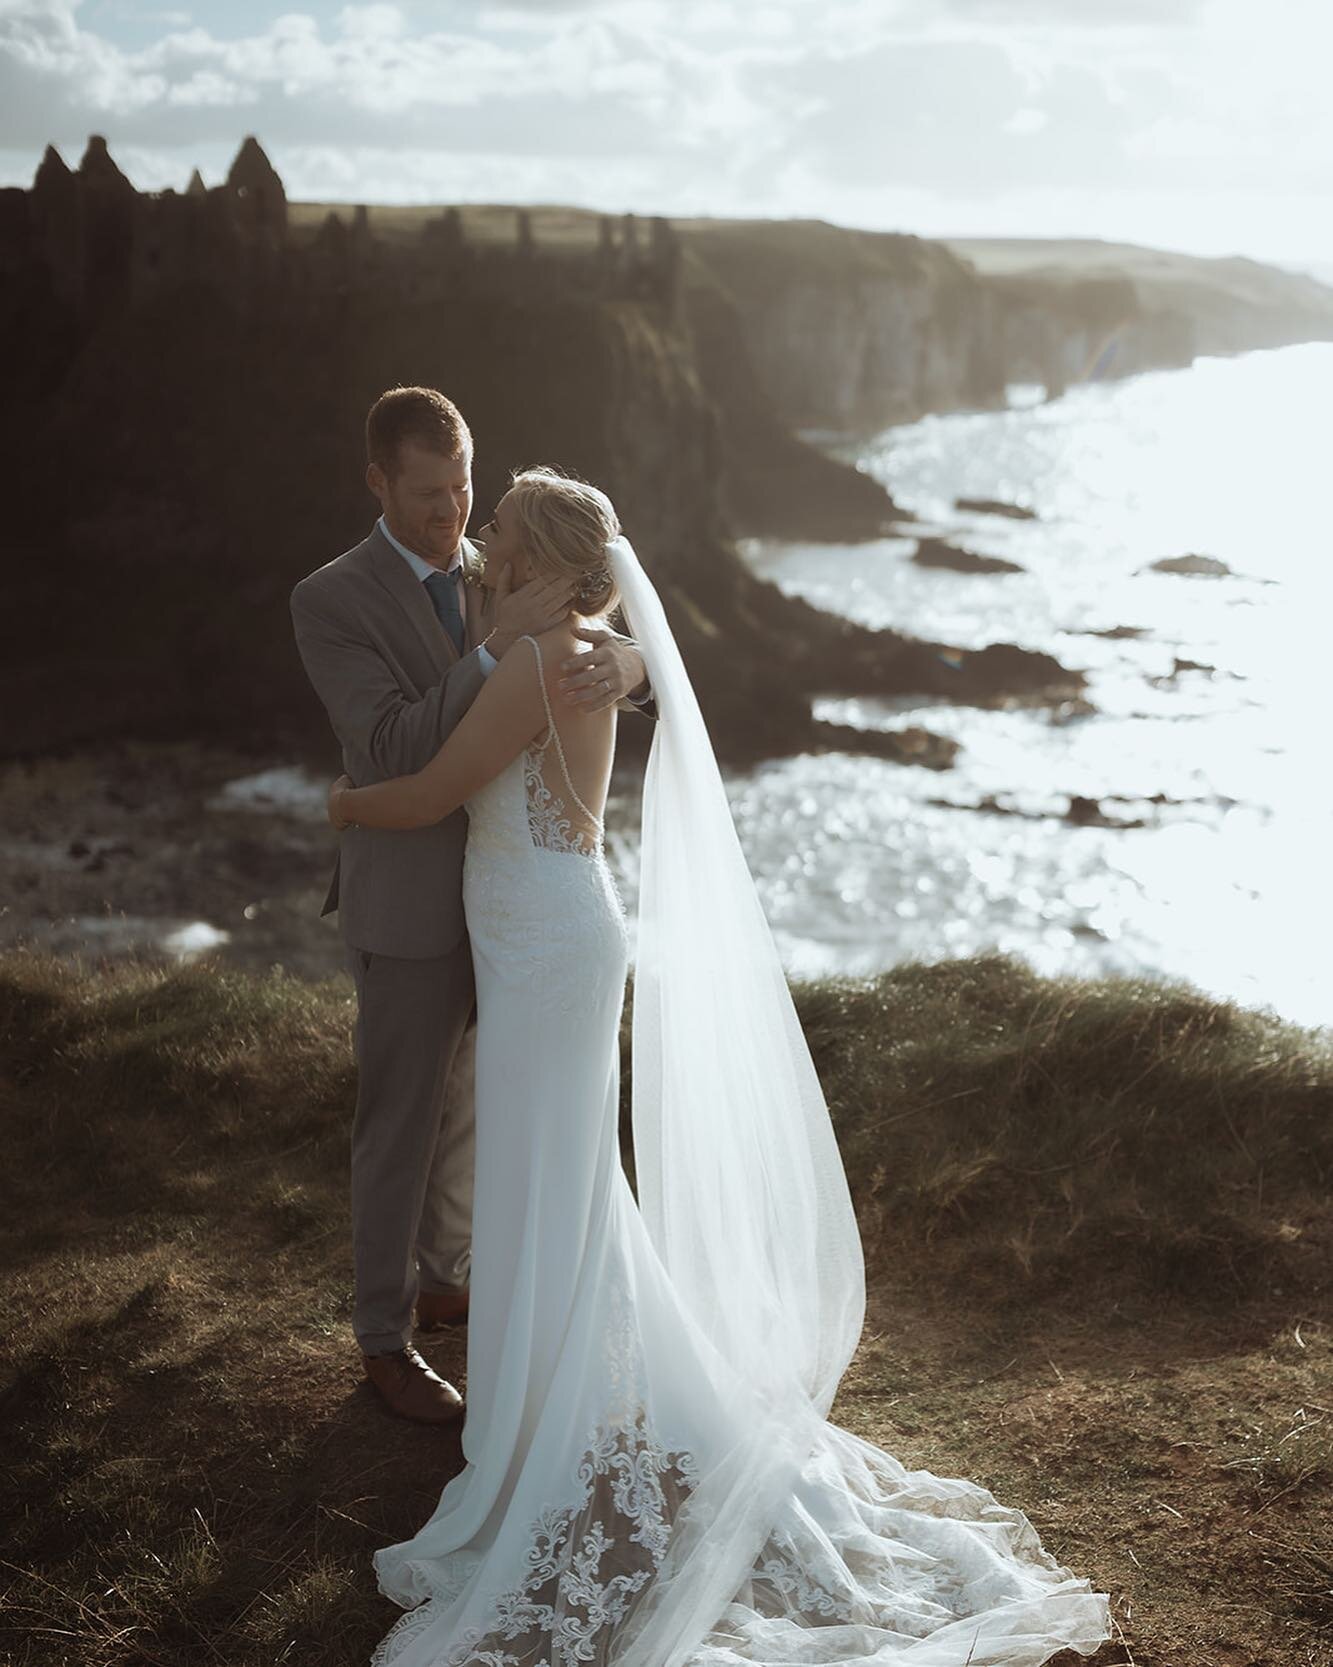 Jenny &amp; Bleddyn&rsquo;s big day was a beautiful one, &amp; was perfectly topped off by this visit to Dunluce Castle, near Bushmills in Northern Ireland.

Photography + videography: @tyronrossphotography

www.tyronrossphotography.com

#greenweddin